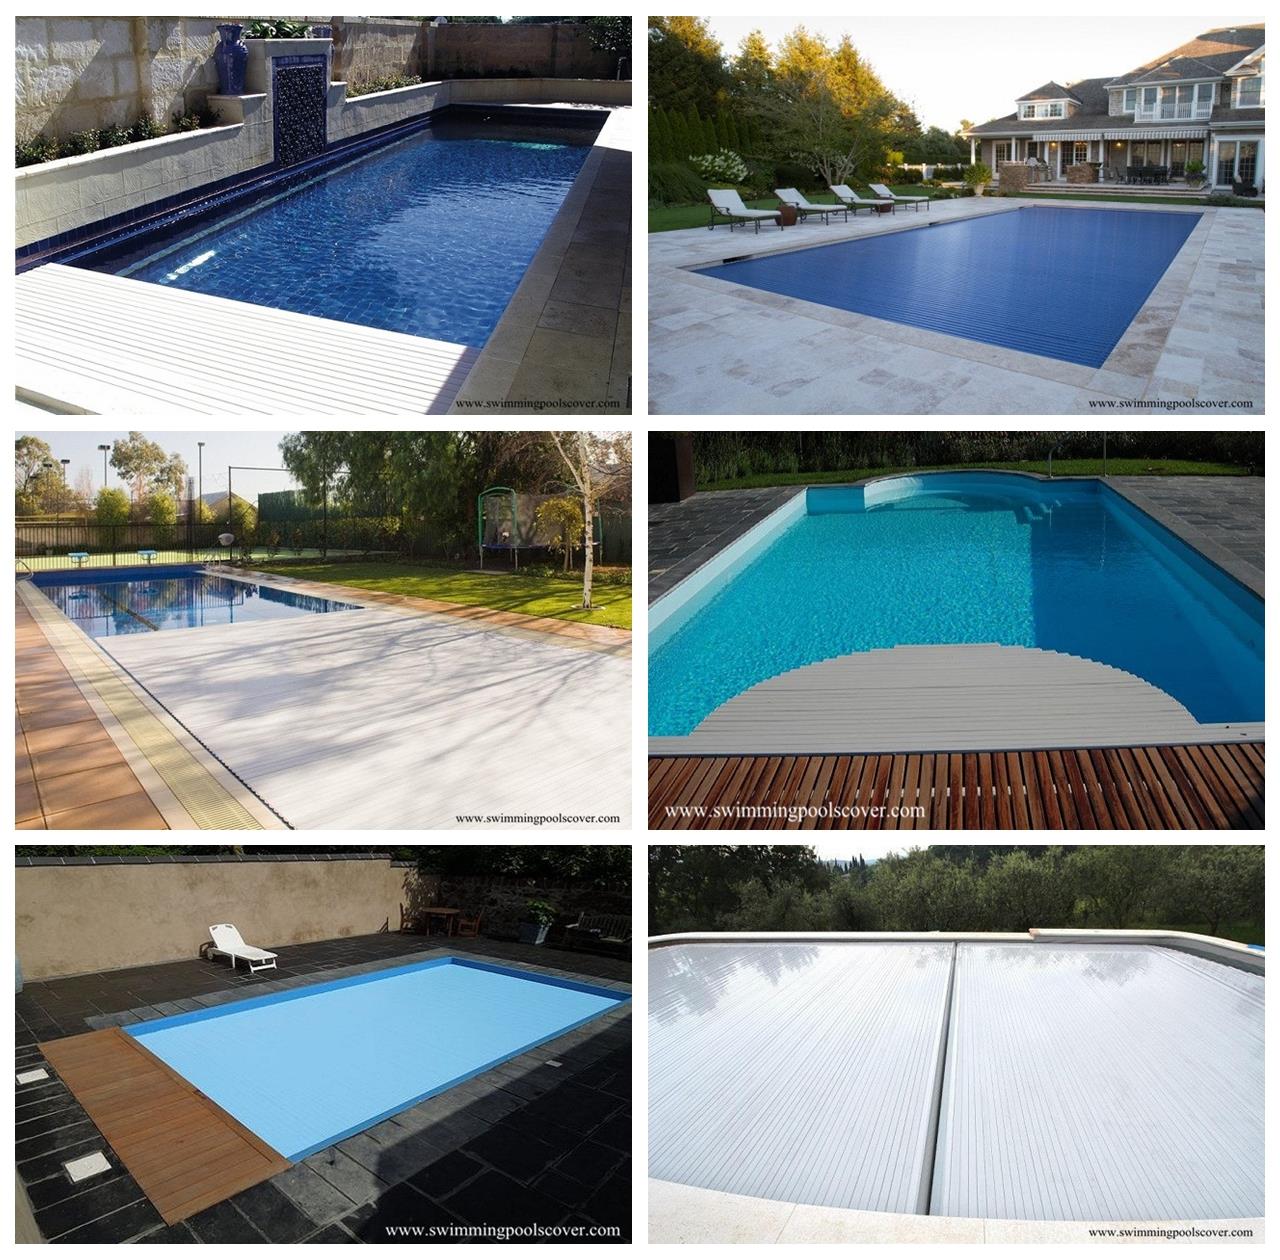 Automatic Slatted PVC Pool Covers Inground For Outdoor.jpg